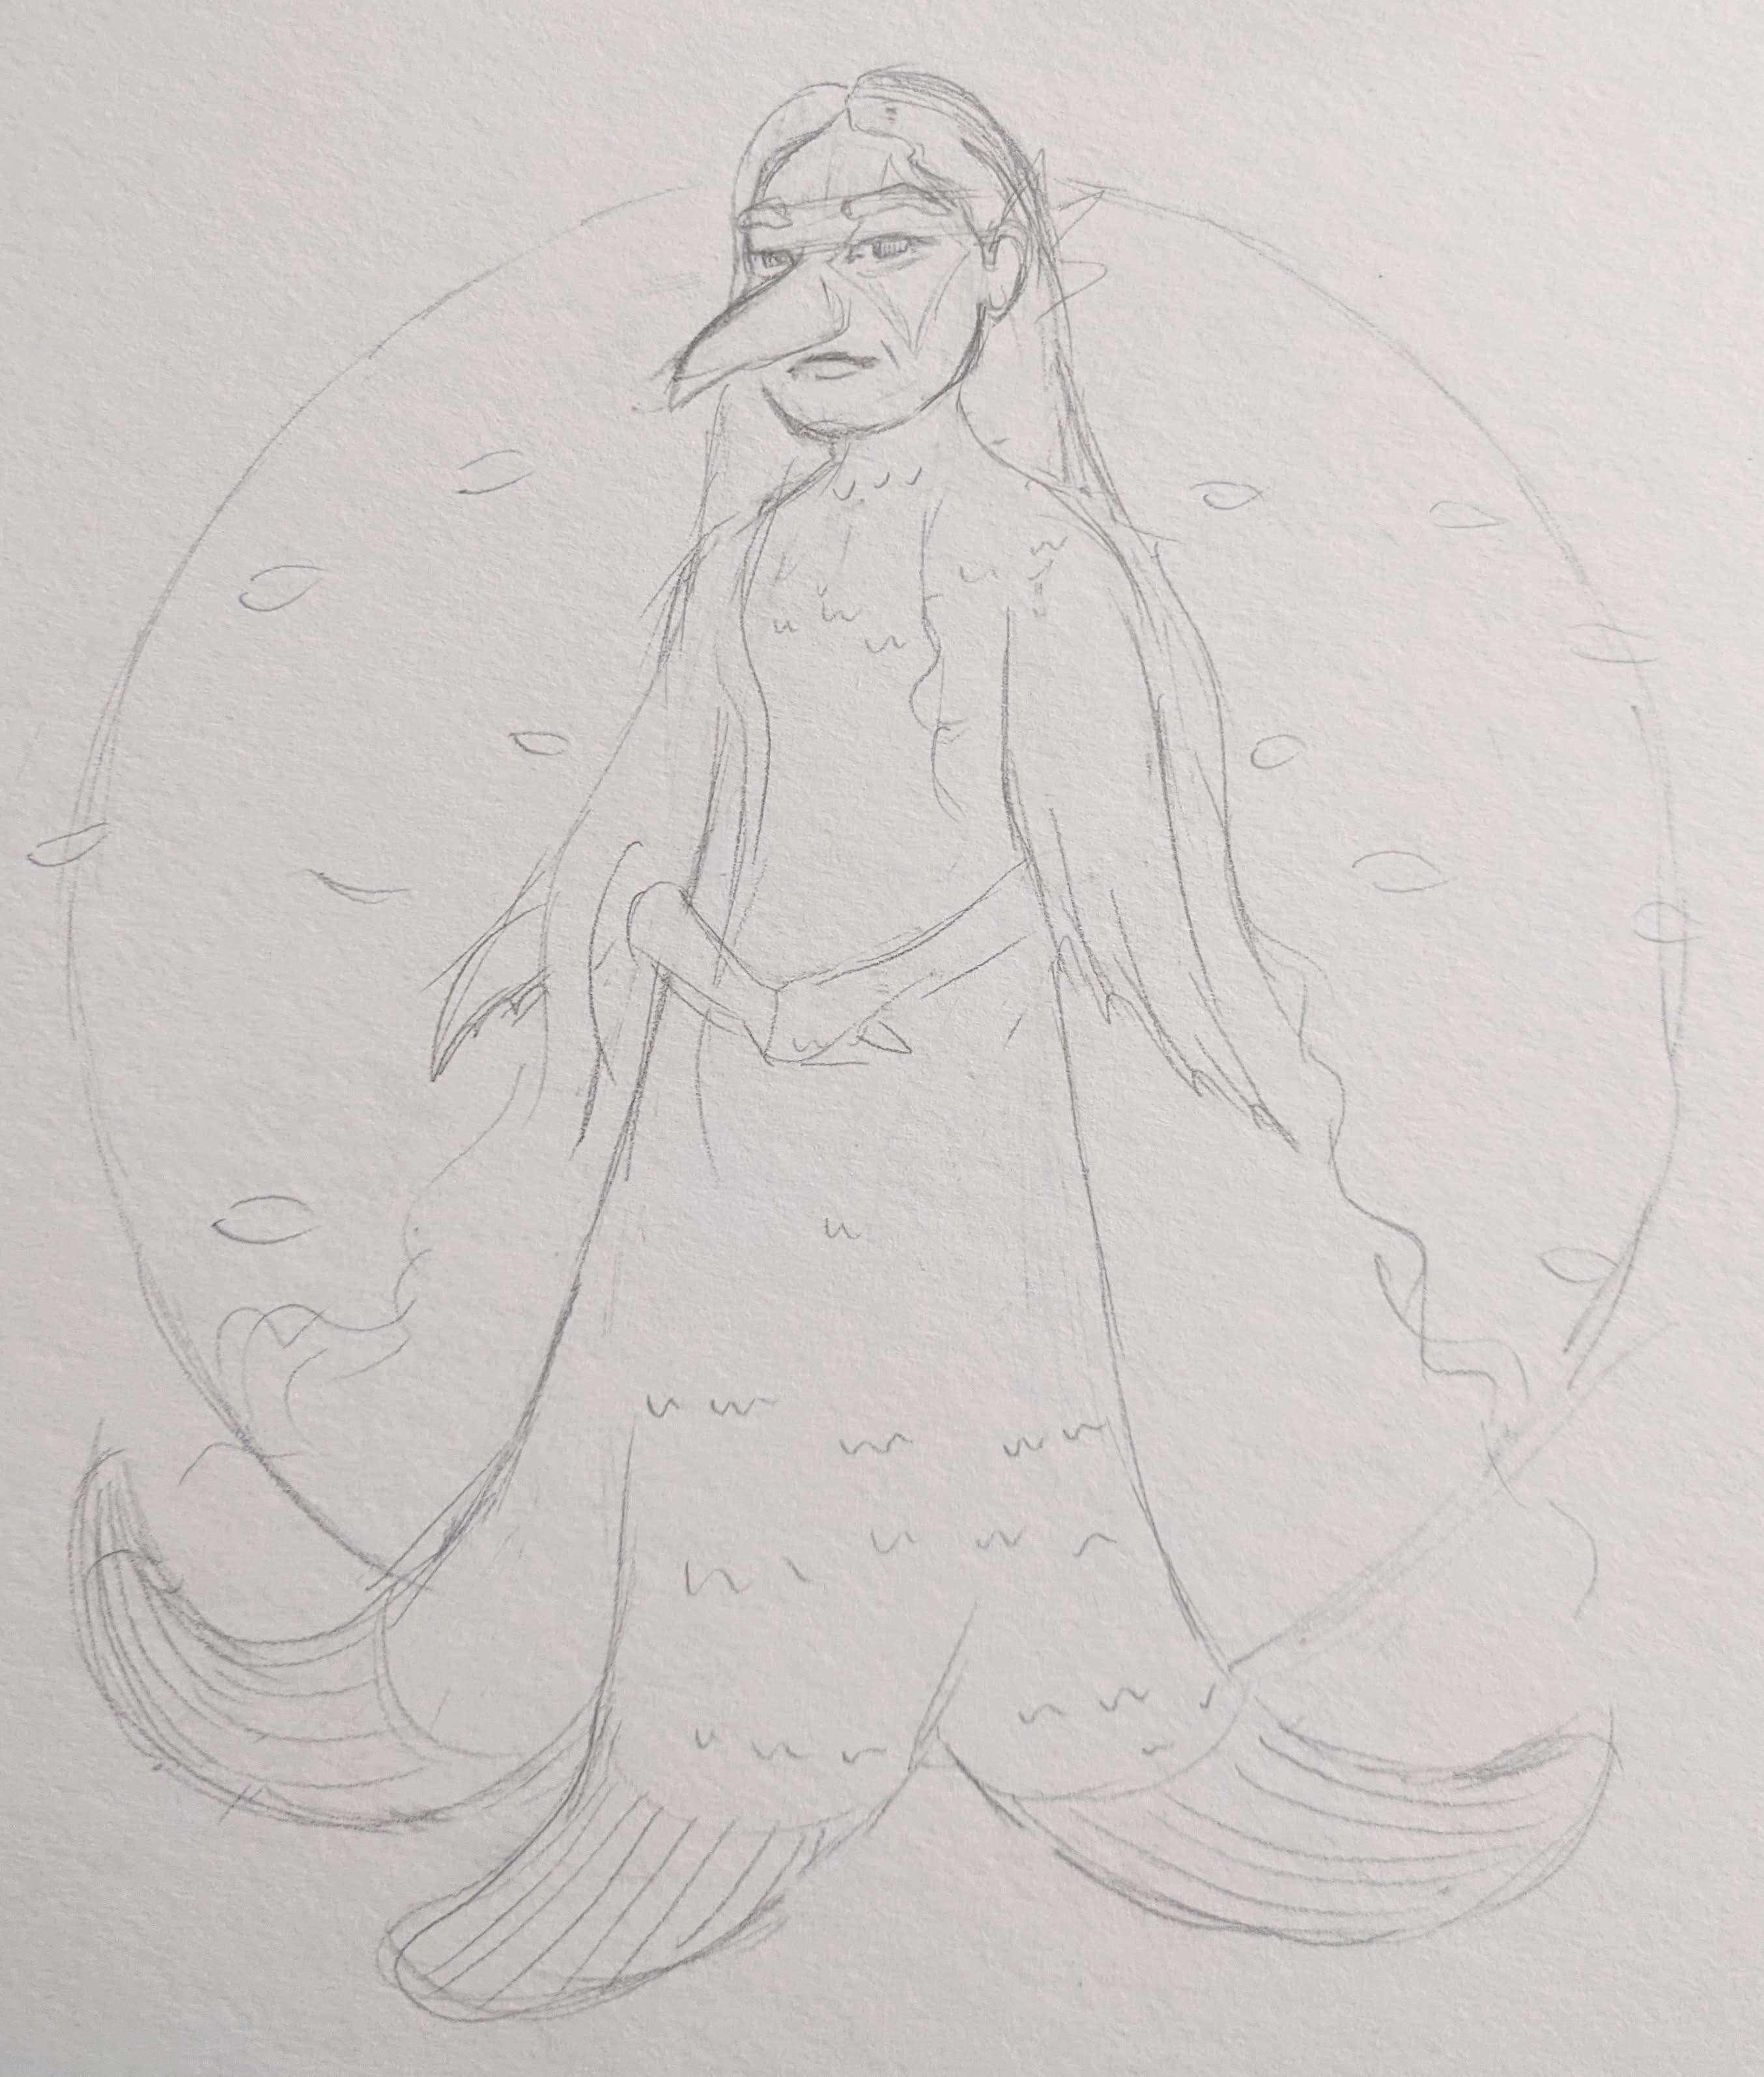 pencil sketch of a young girl with 3 fishy fins instead of feet. She has a beak and long wavy hair.